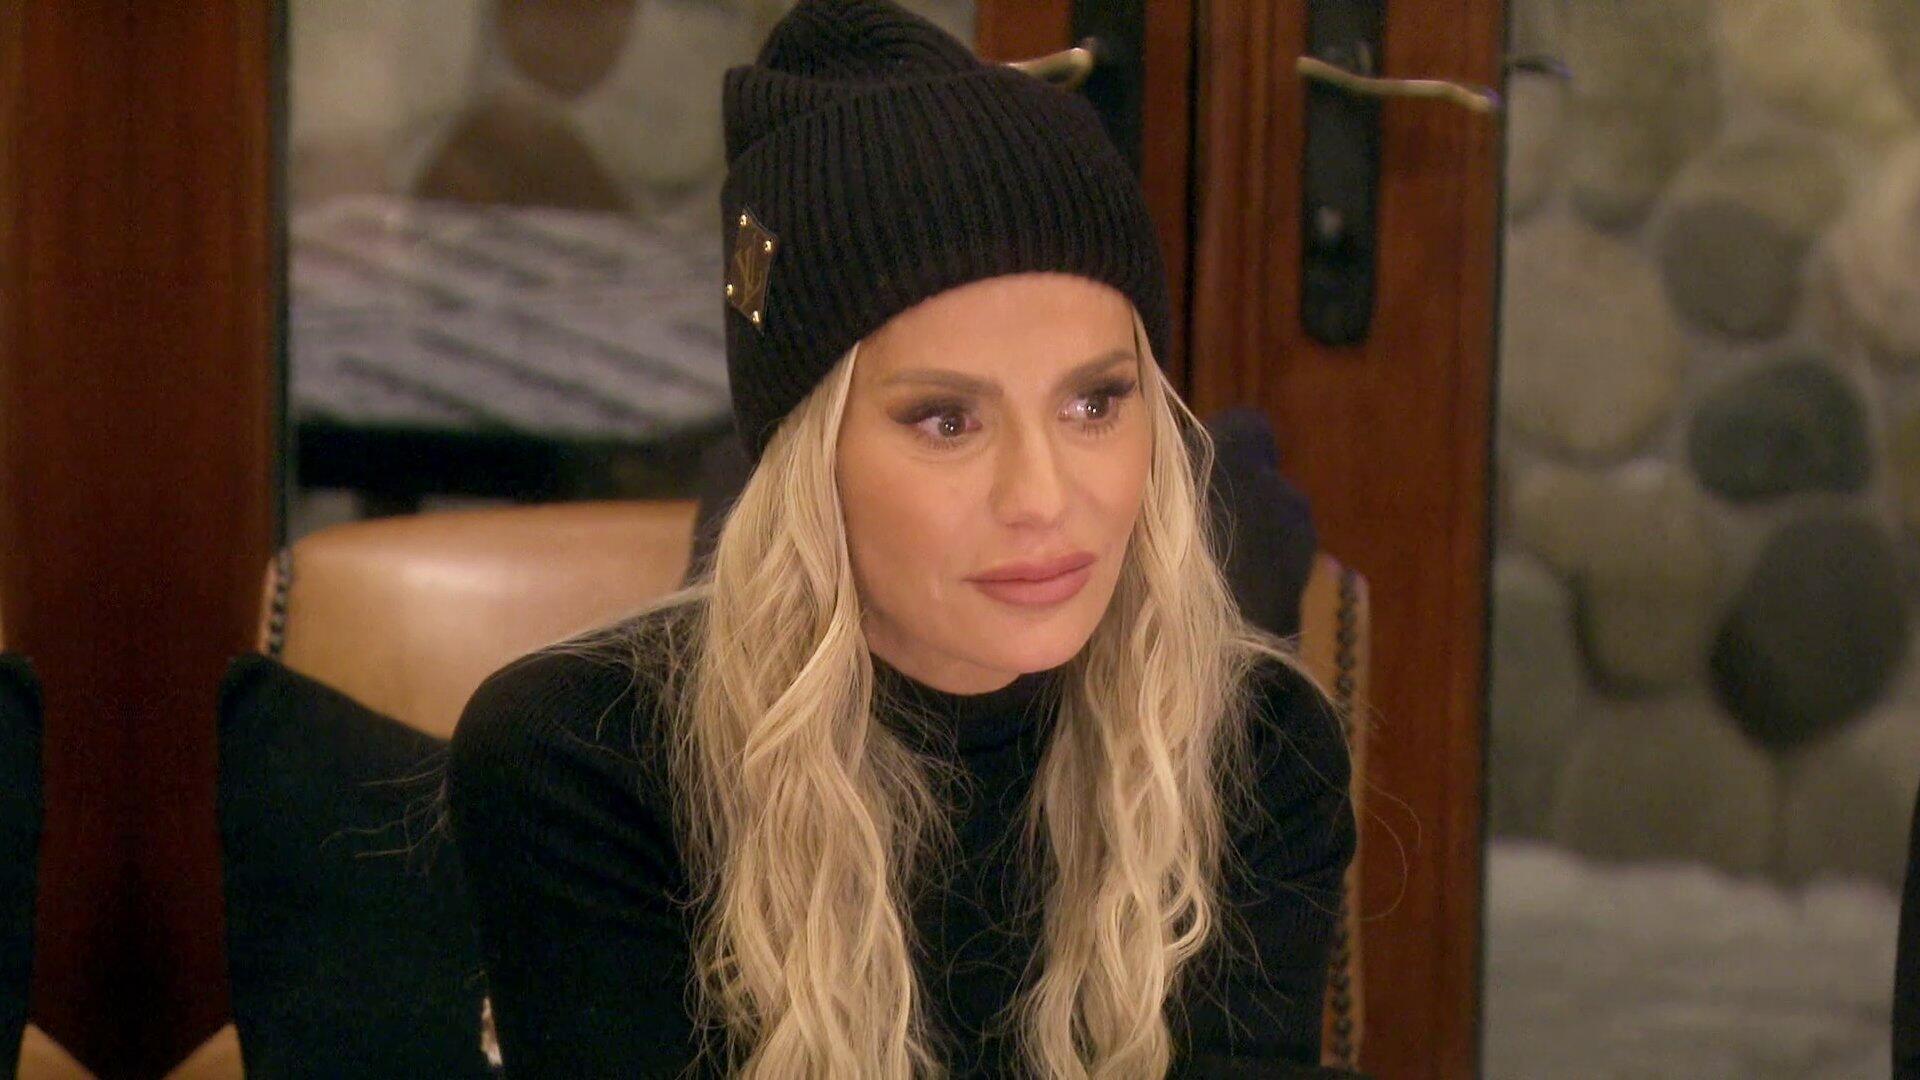 Dorit Kemsley - The Real Housewives of Beverly Hills | Season 12 Episode 16 | Crystal Kung Minkoff style